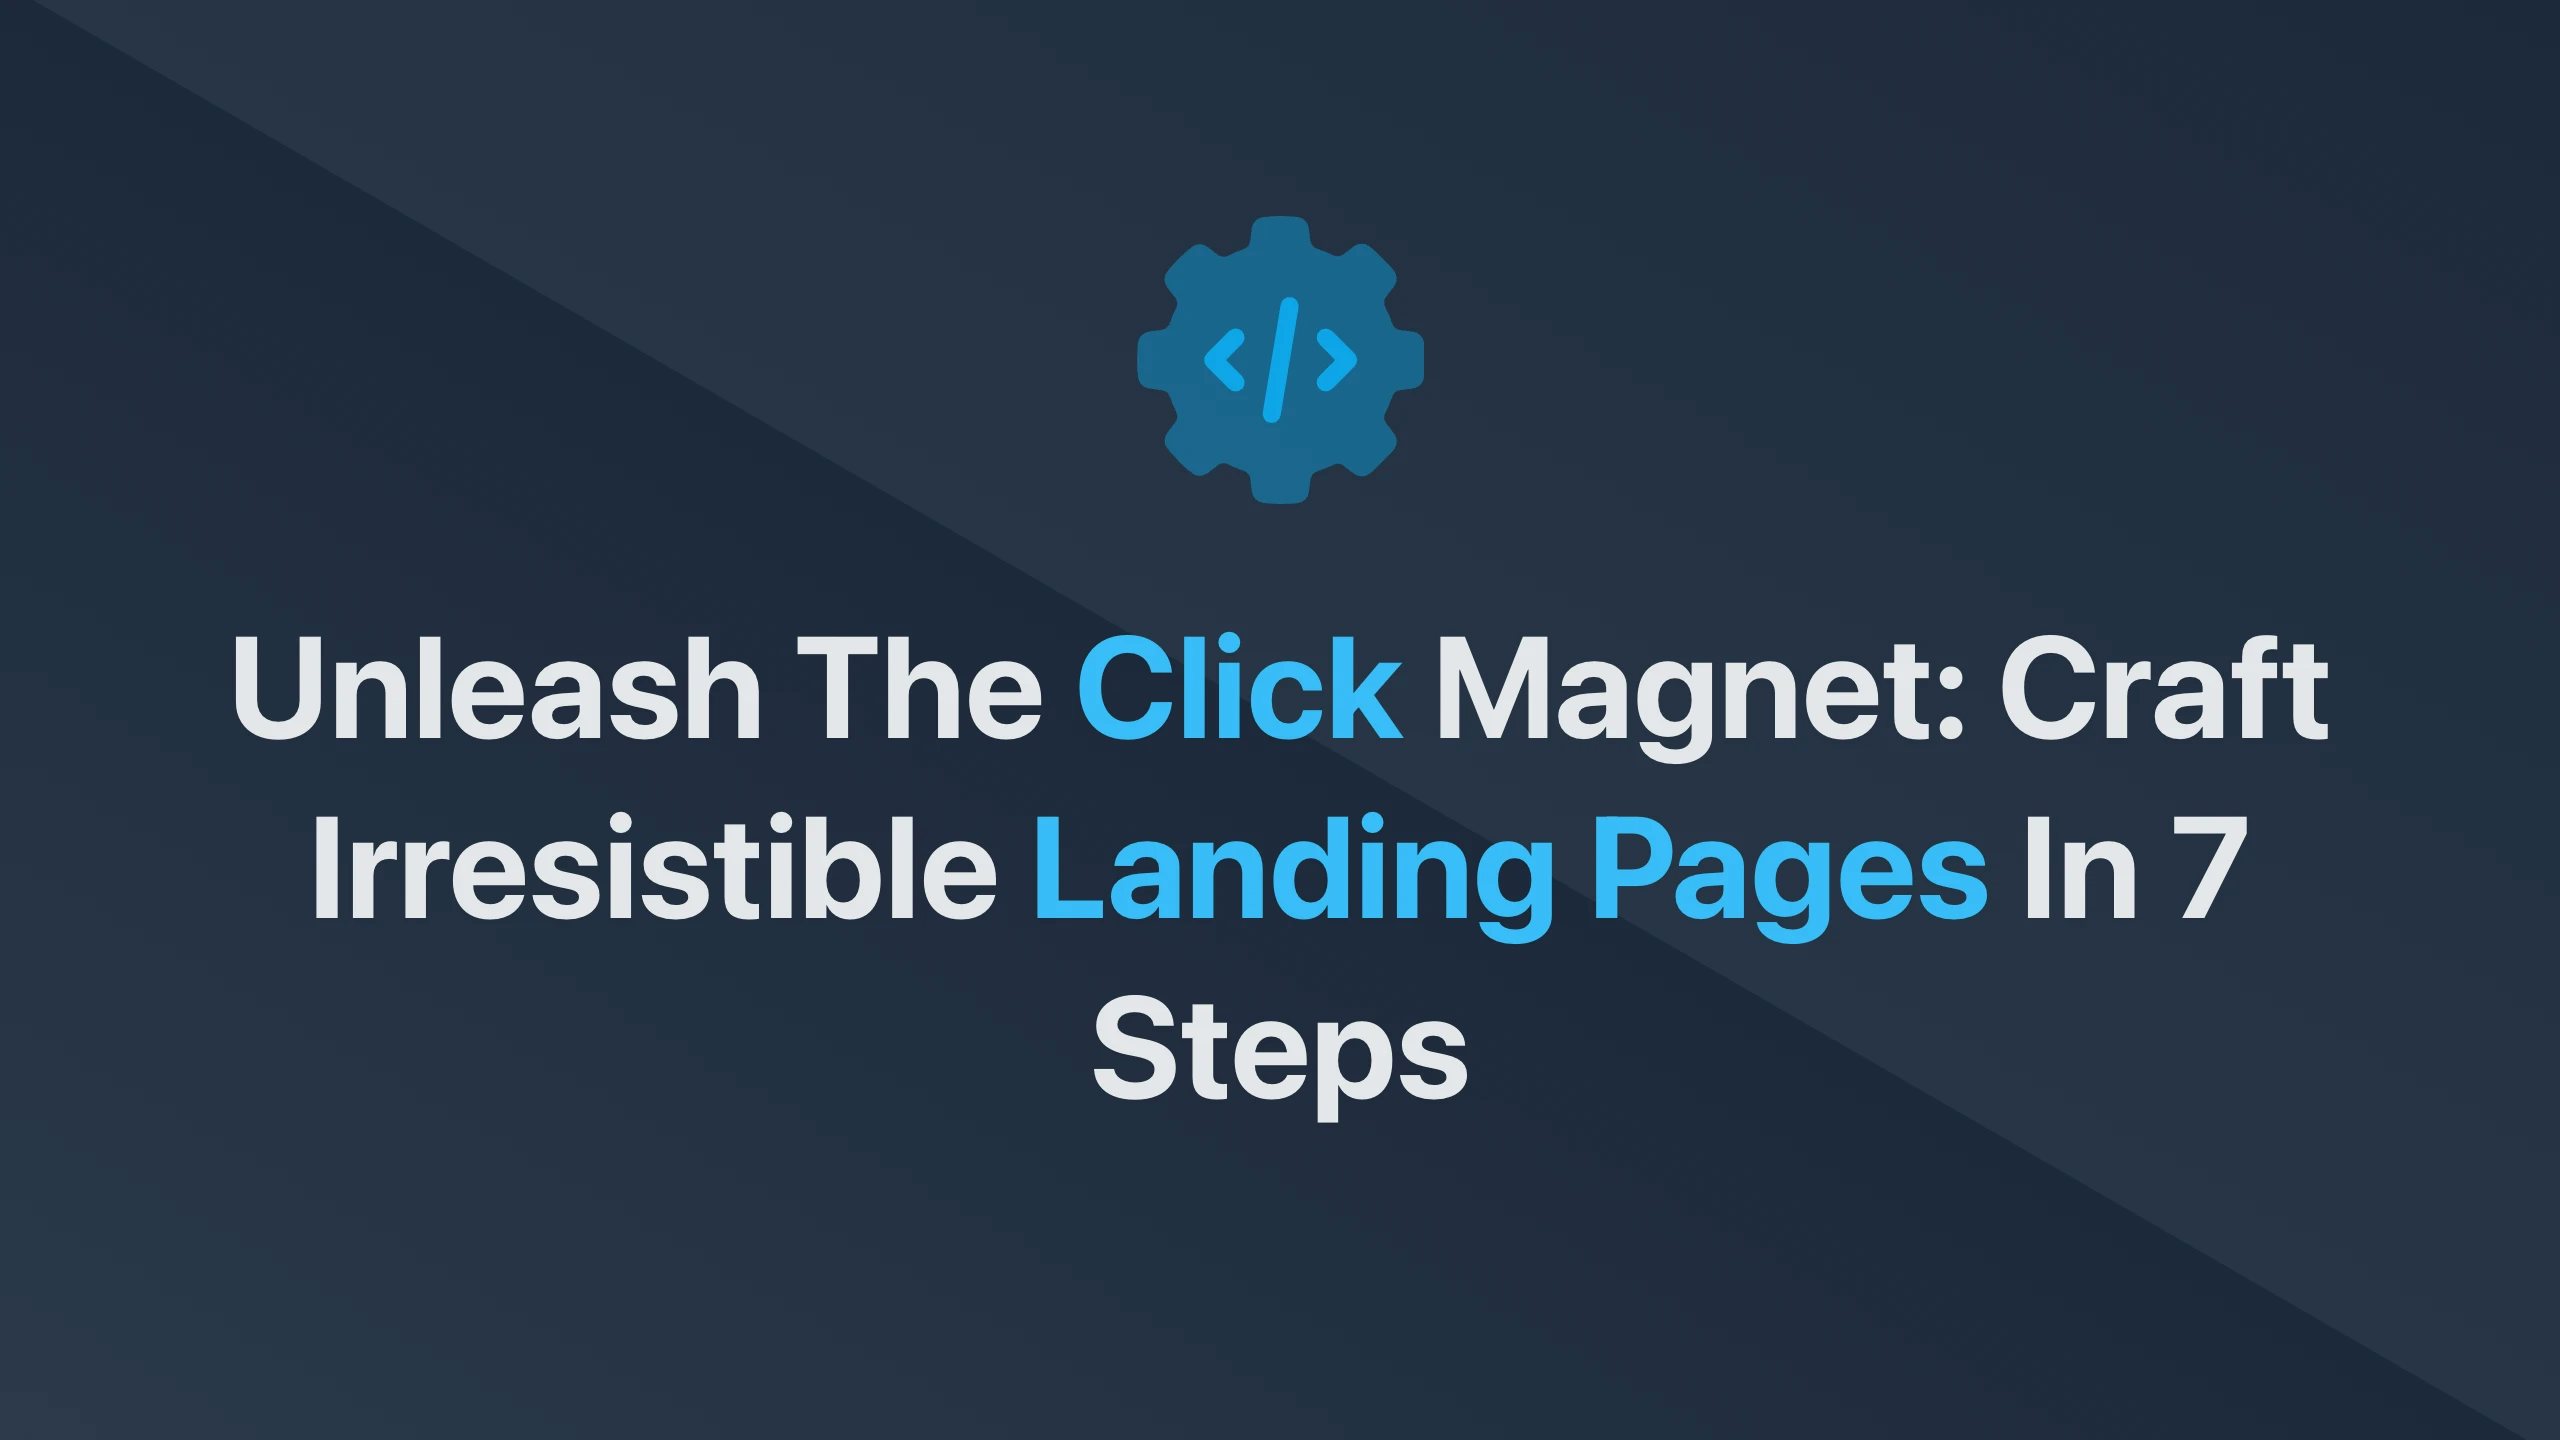 Cover Image for Unleash the Click Magnet: Craft Irresistible Landing Pages in 7 Steps